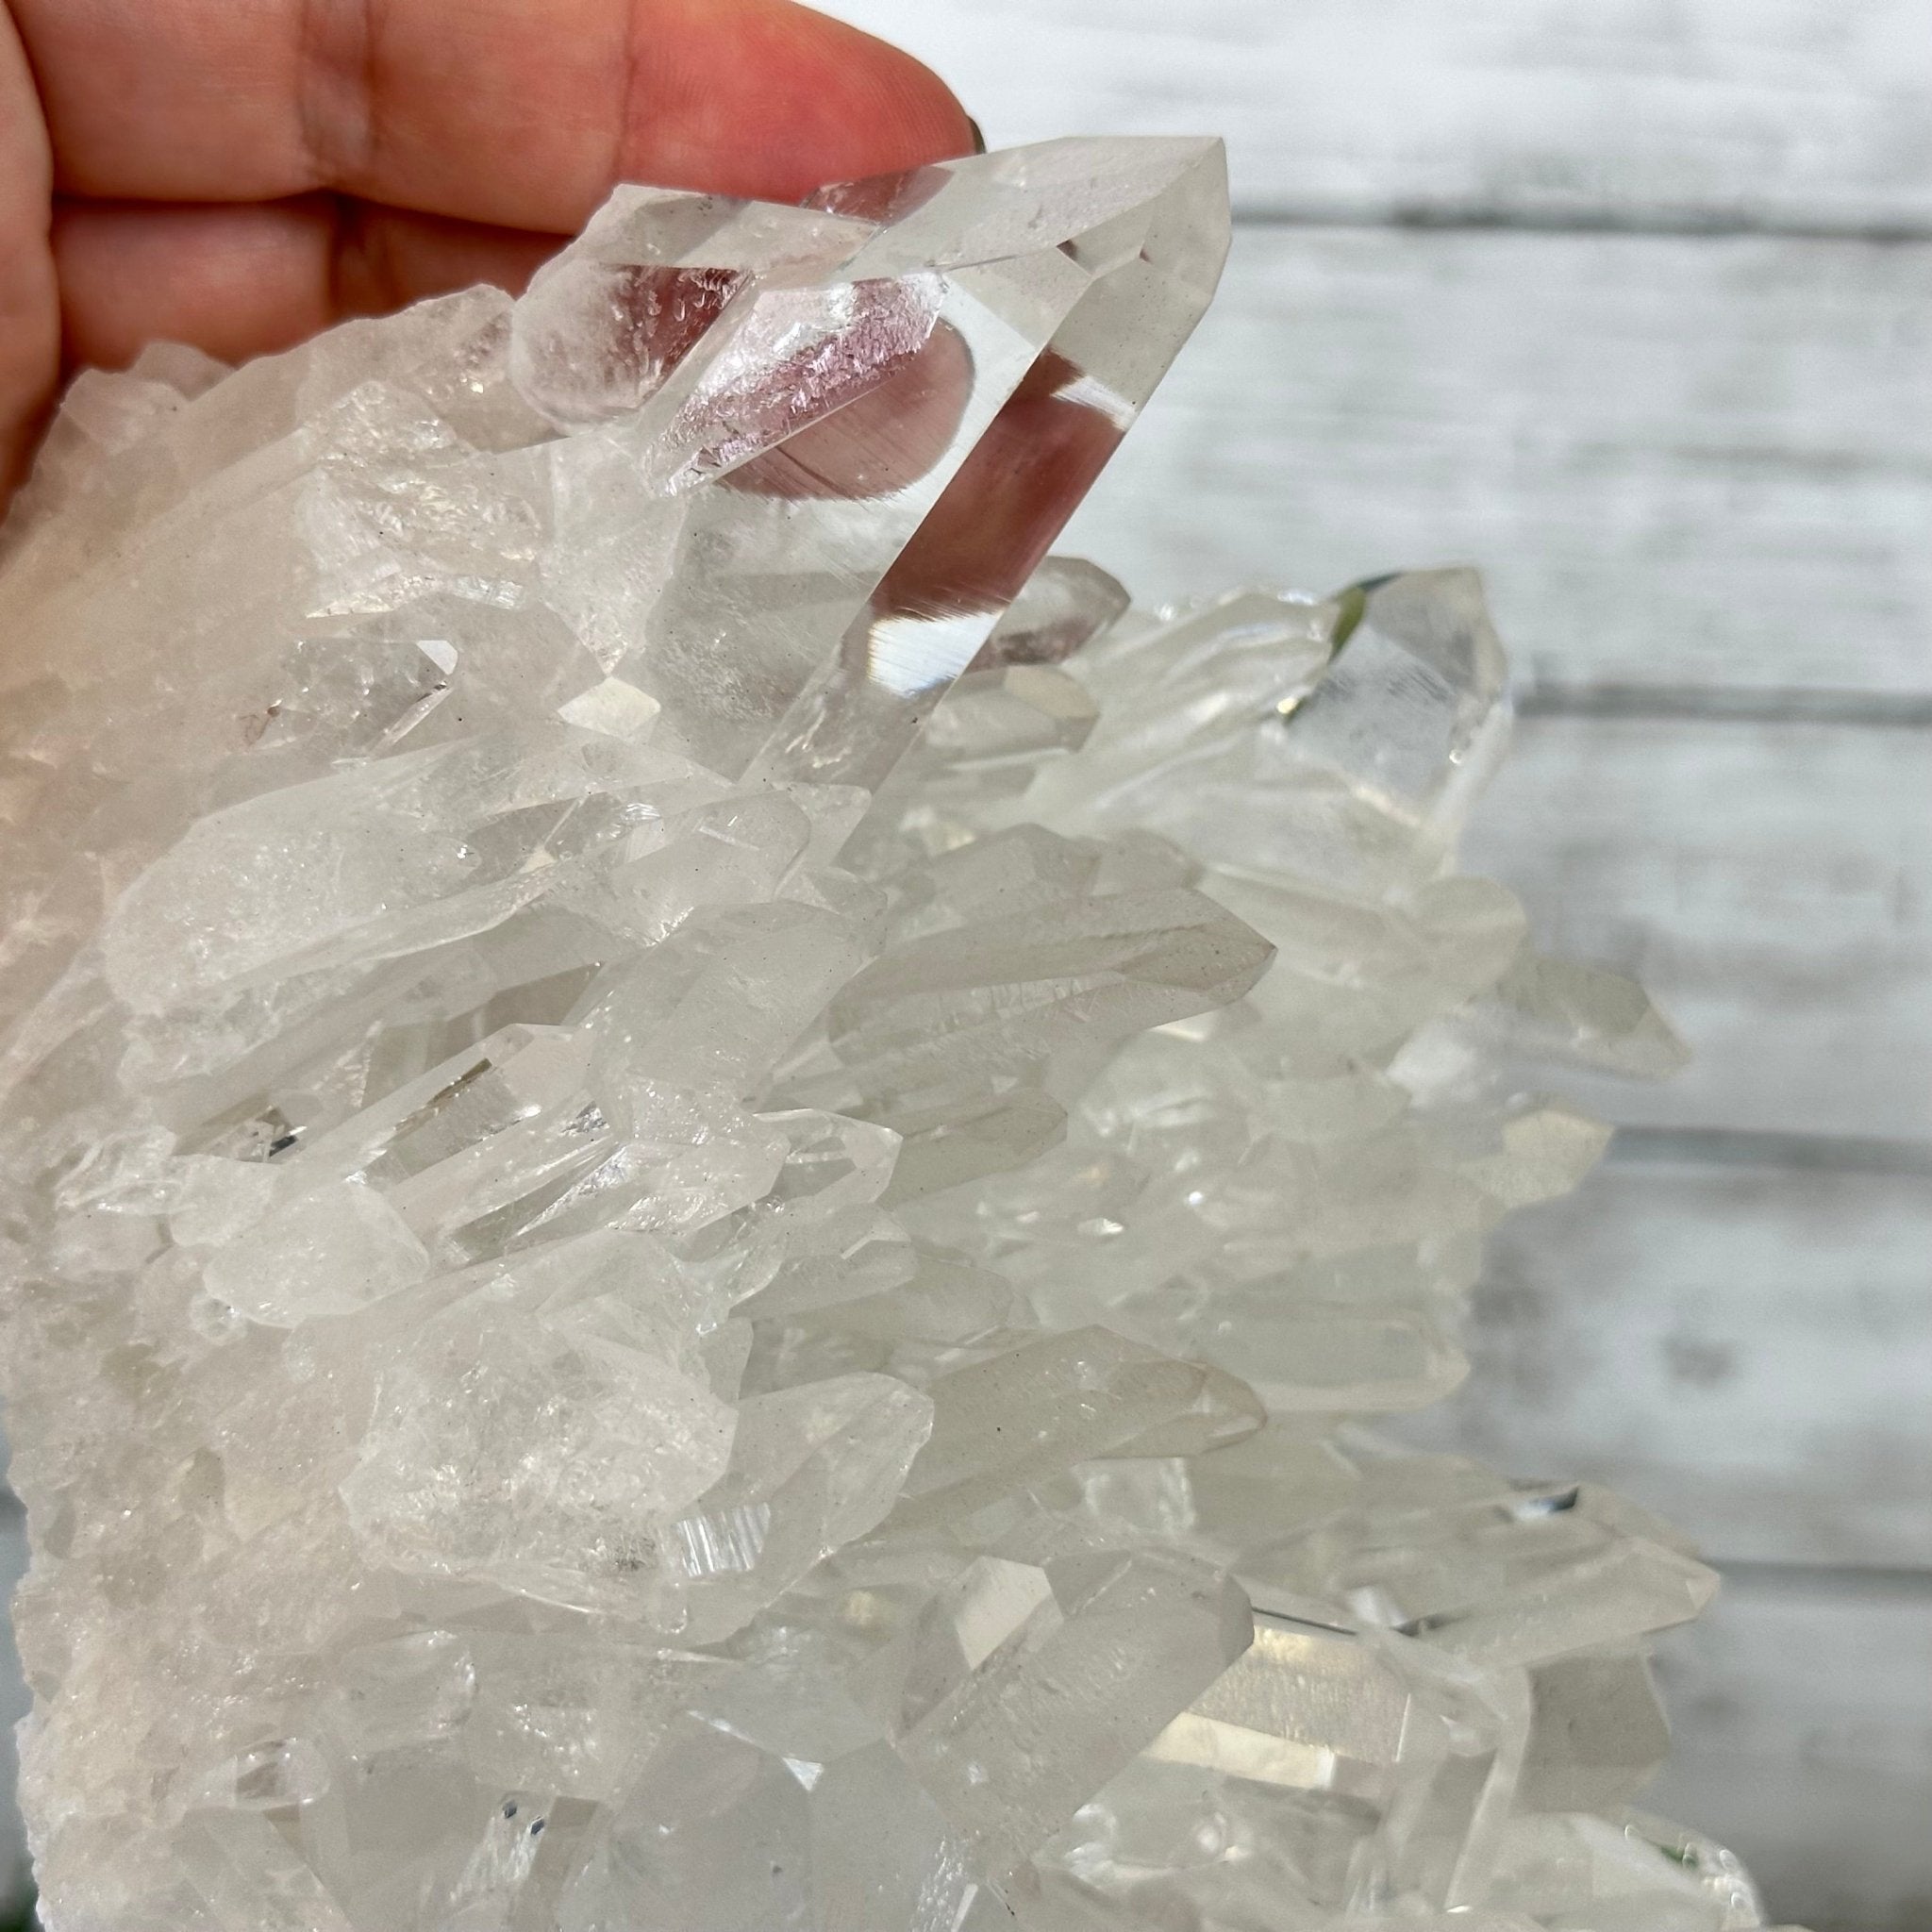 Super Quality Clear Quartz Crystal Cluster, metal base, 8.4 lbs & 11.1" Tall #5495-0077 by Brazil Gems® - Brazil GemsBrazil GemsSuper Quality Clear Quartz Crystal Cluster, metal base, 8.4 lbs & 11.1" Tall #5495-0077 by Brazil Gems®Clusters on Fixed Bases5495-0077